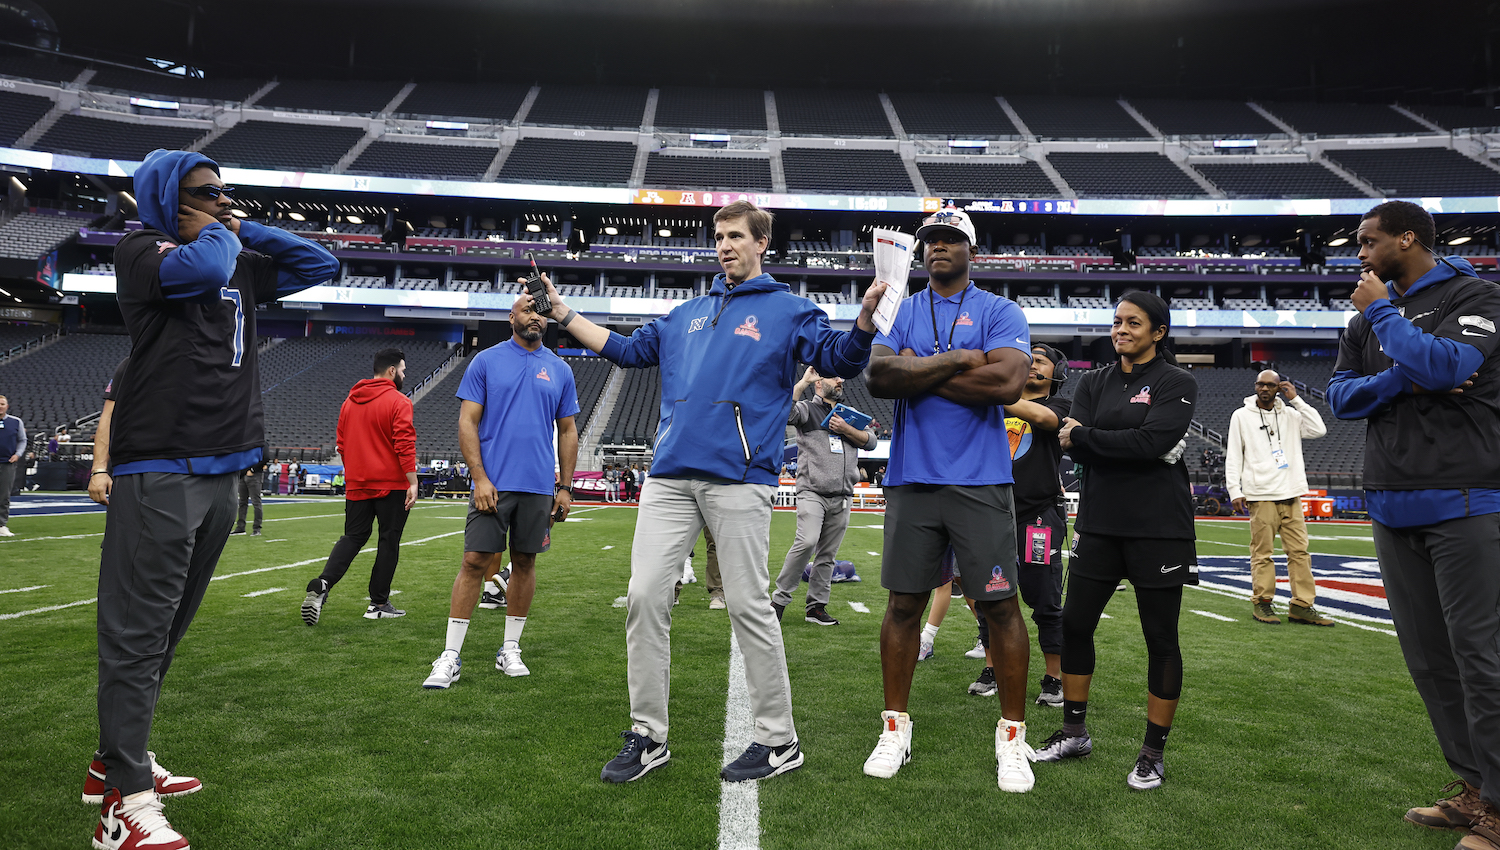 NFC head coach Eli Manning leads a huddle during a practice session prior to an NFL Pro Bowl football game at Allegiant Stadium on February 04, 2023 in Las Vegas, Nevada.